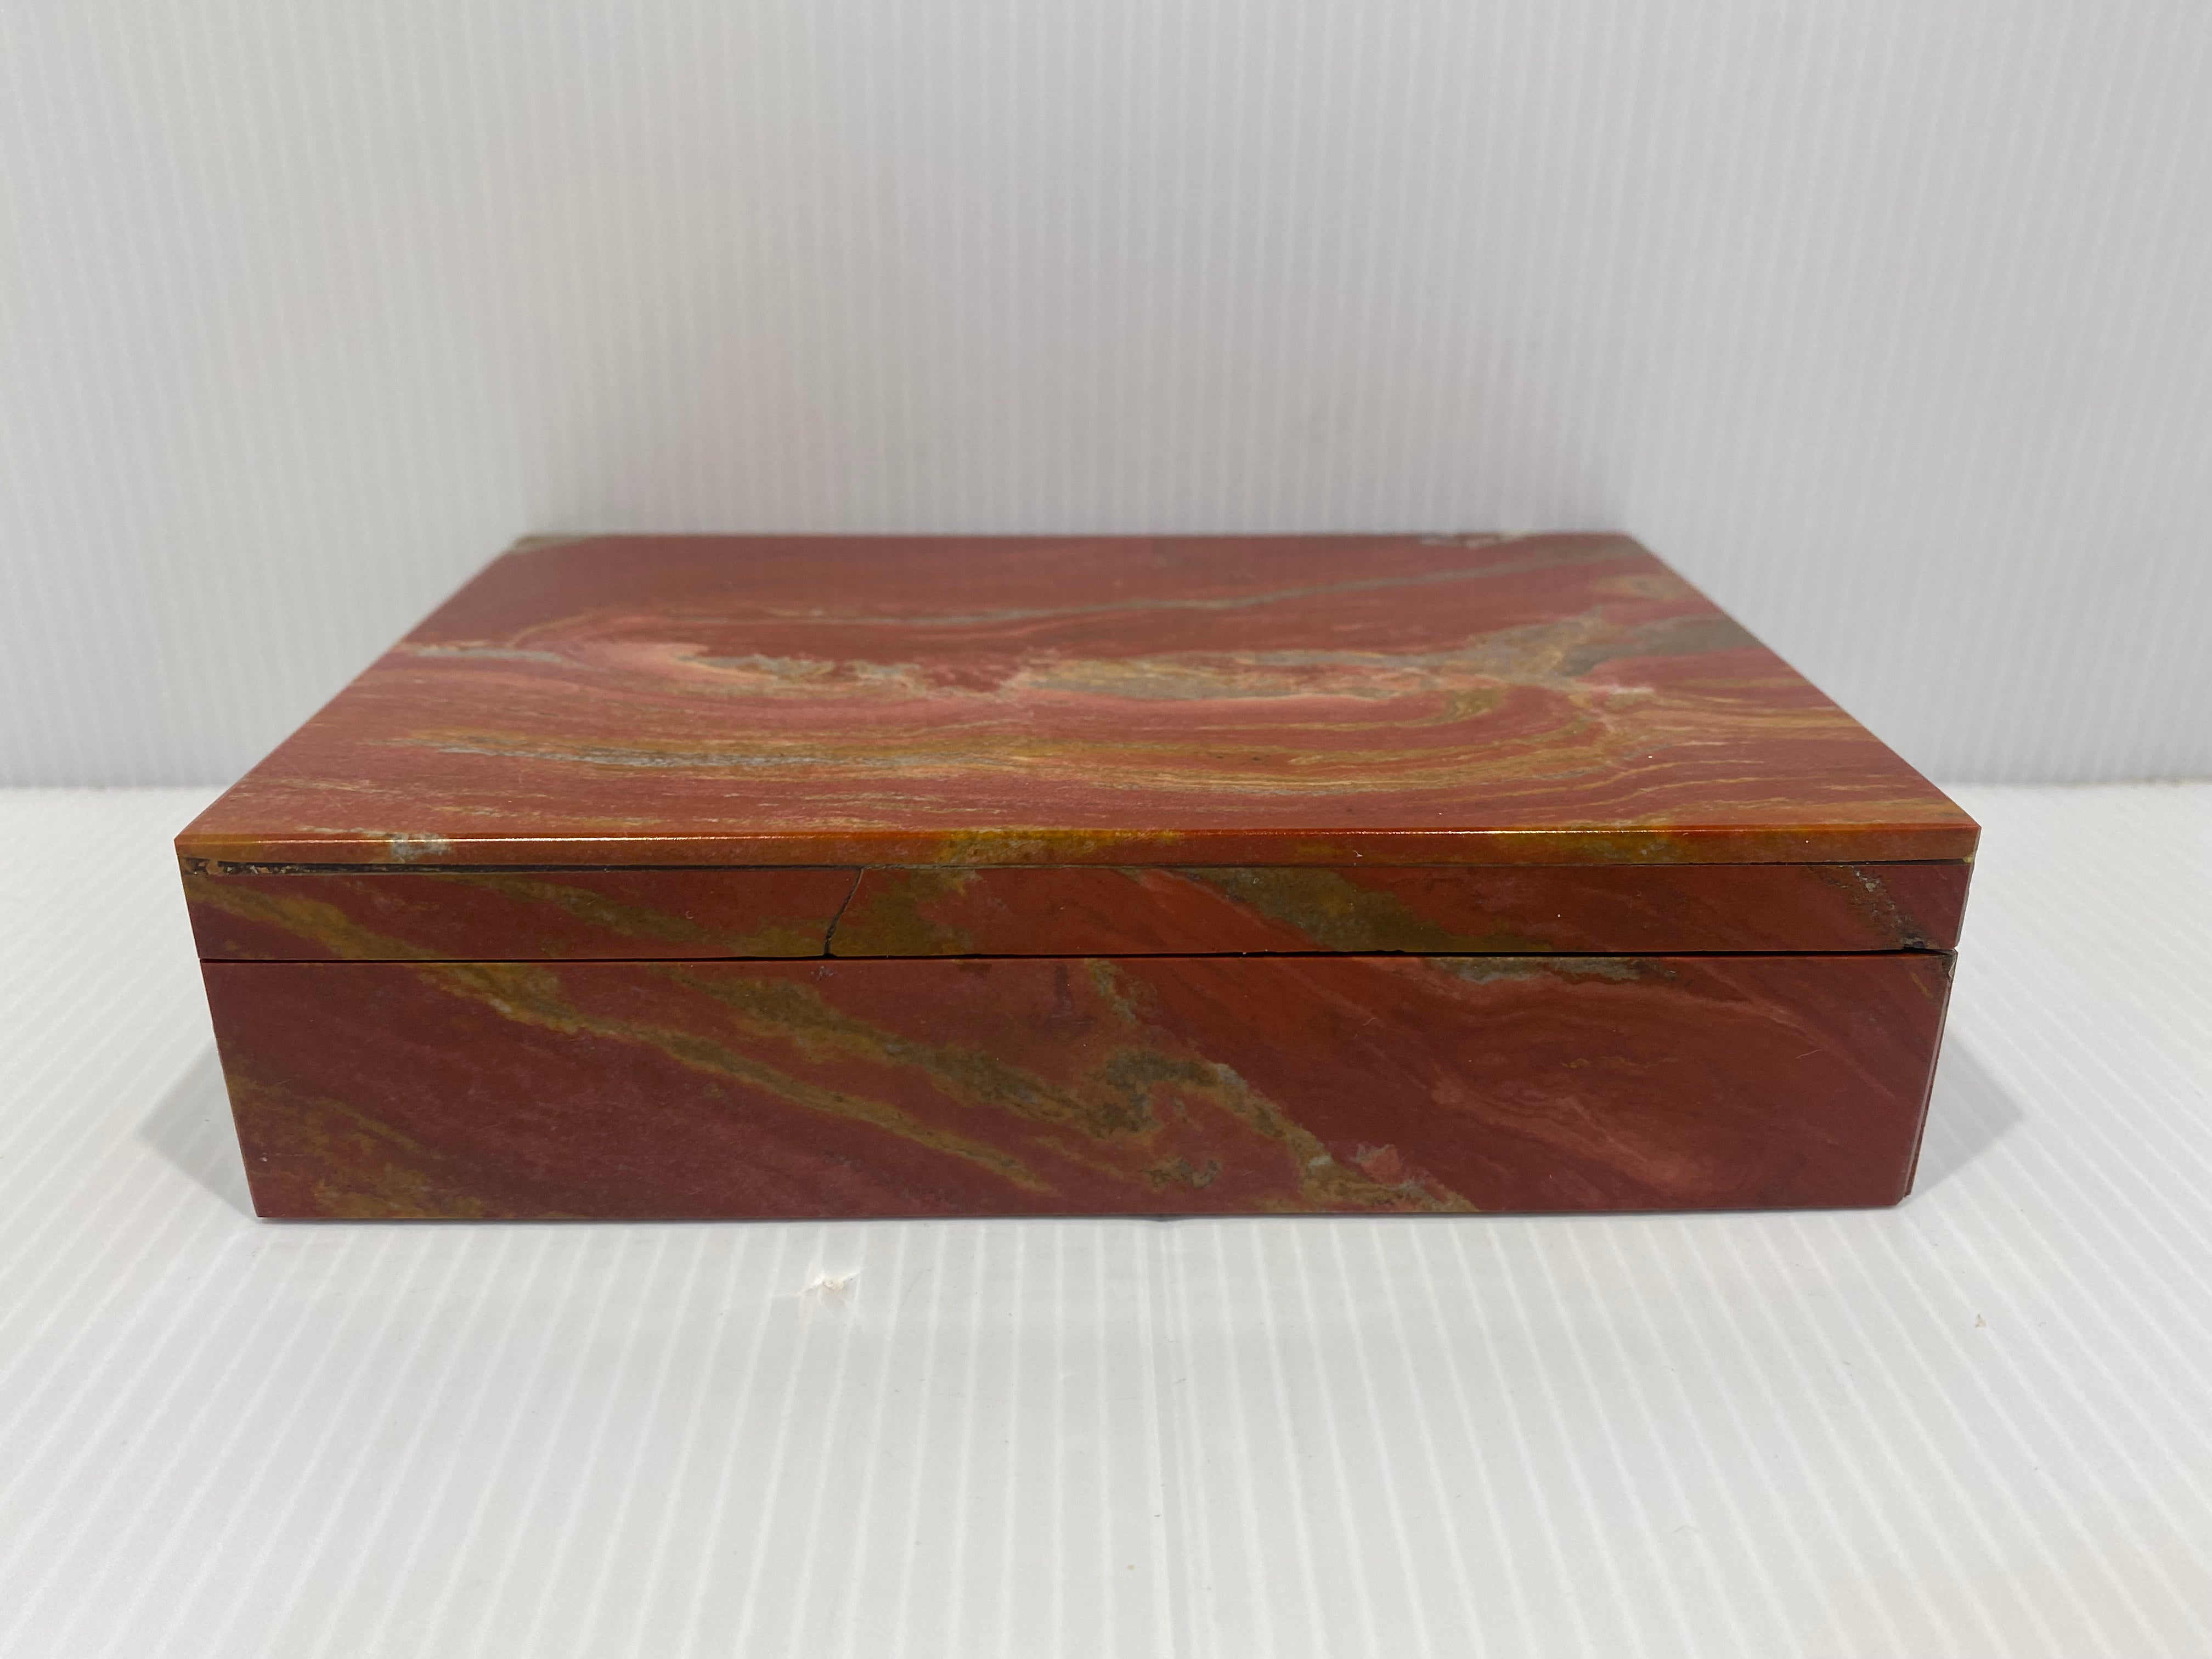 jewelry box made of red obsidian